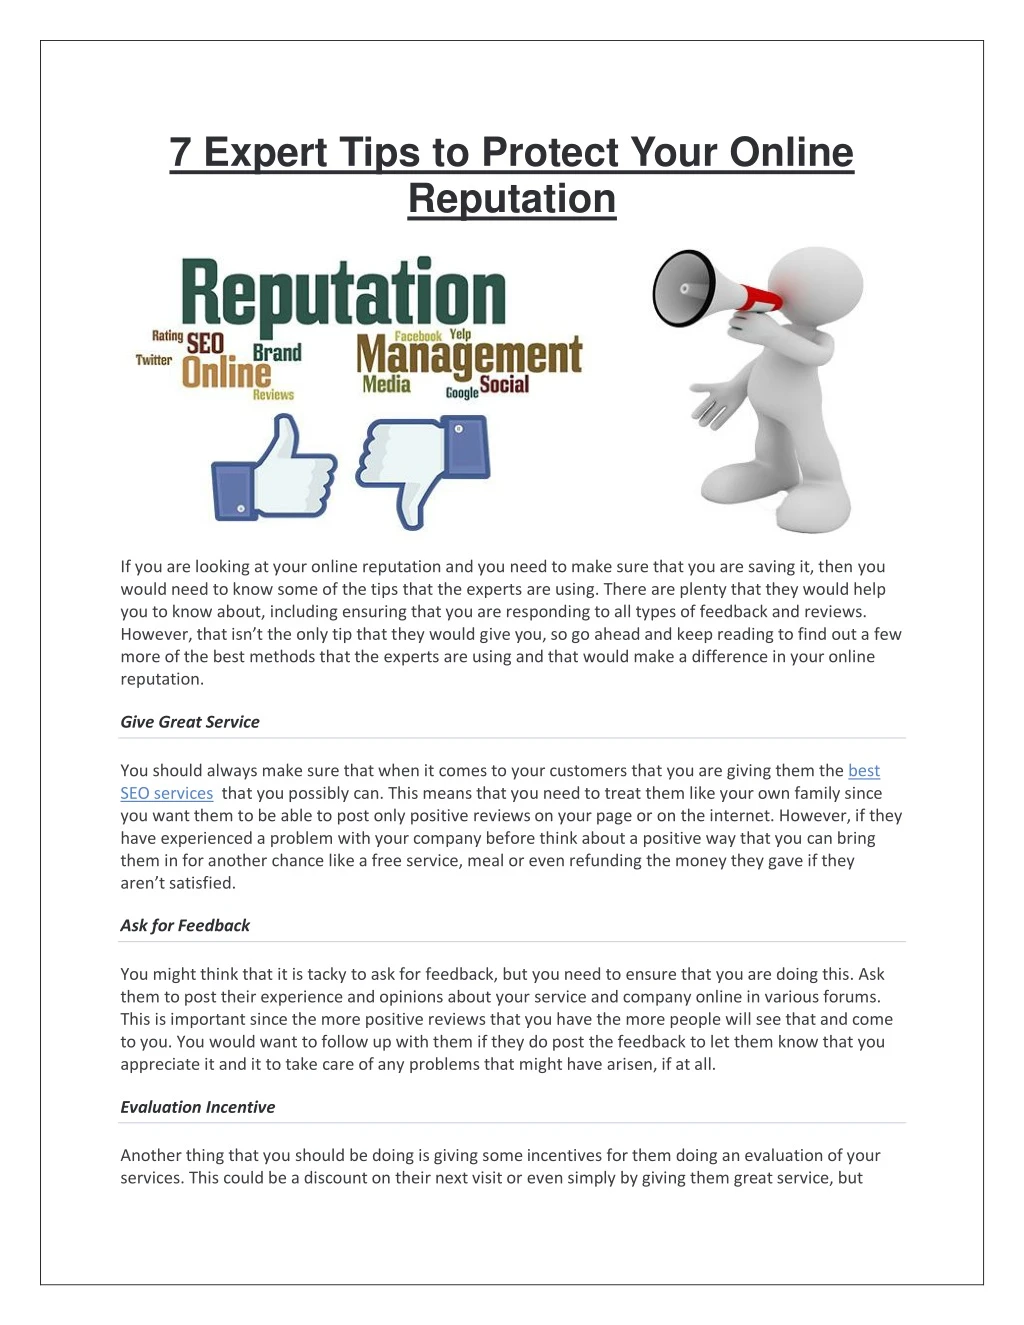 7 expert tips to protect your online reputation